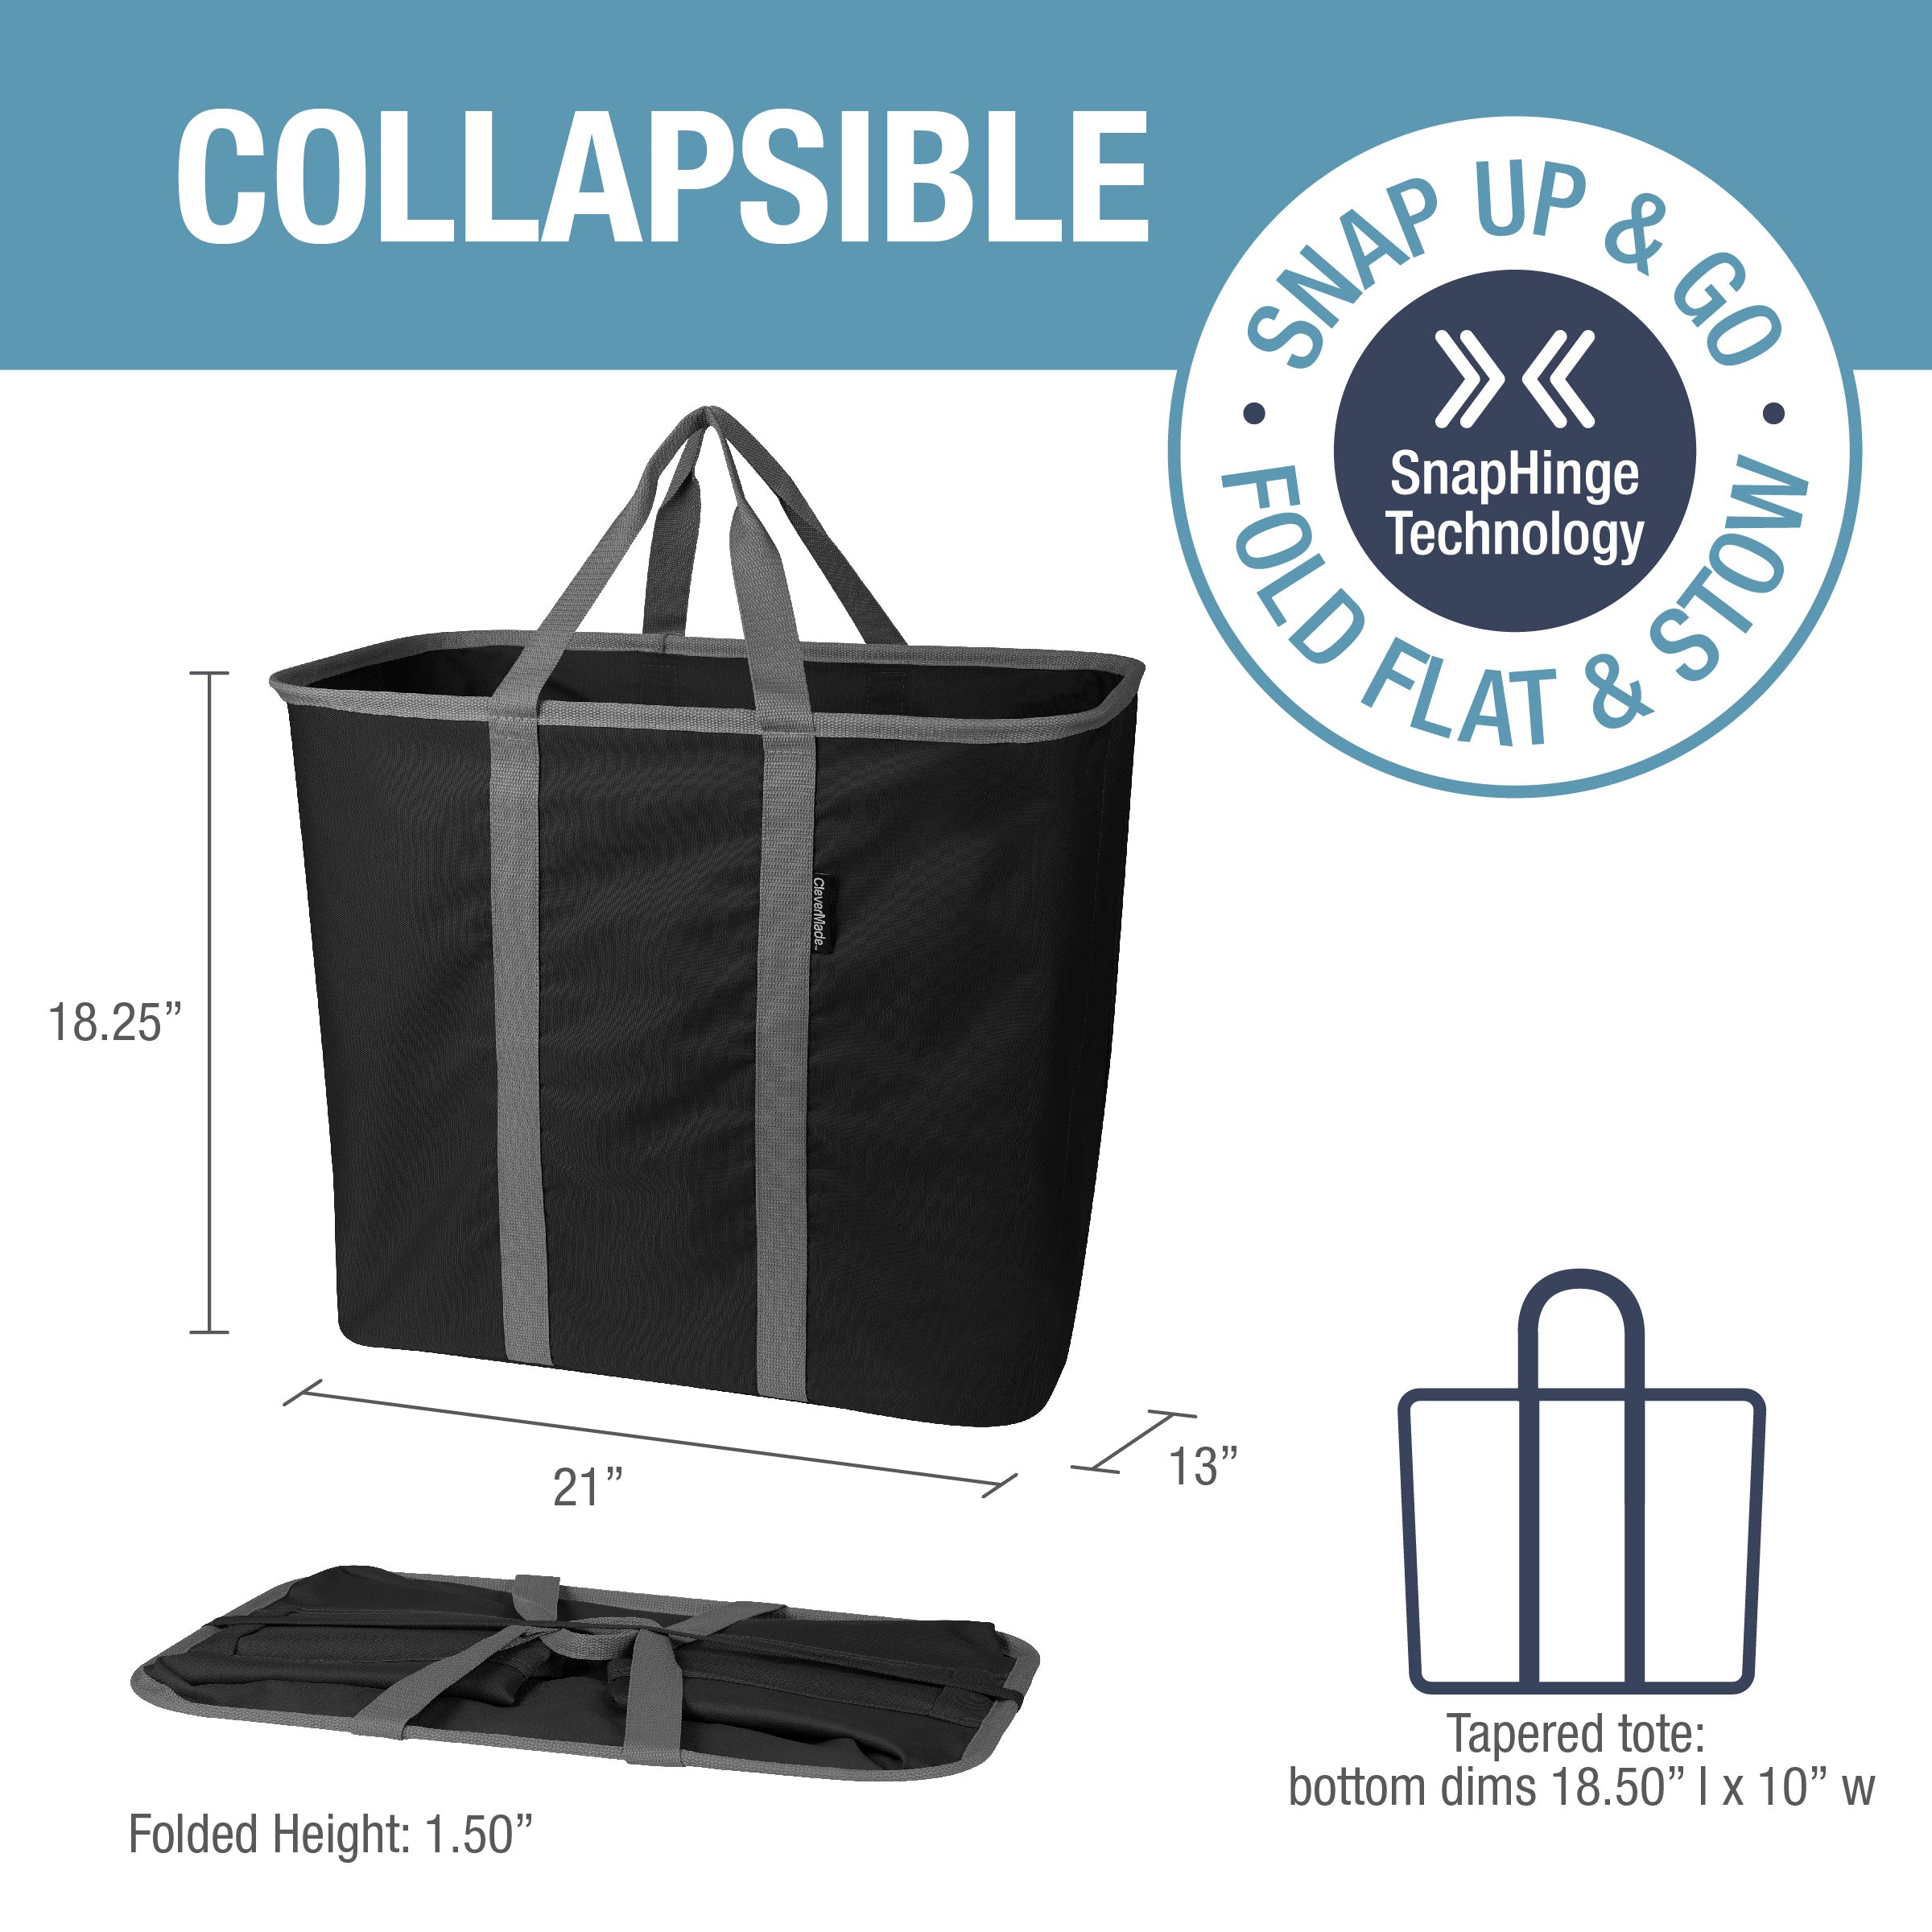 CleverMade Collapsible Fabric Laundry Baskets - Foldable Pop-Up Storage  Container Organizer Bags - L…See more CleverMade Collapsible Fabric Laundry